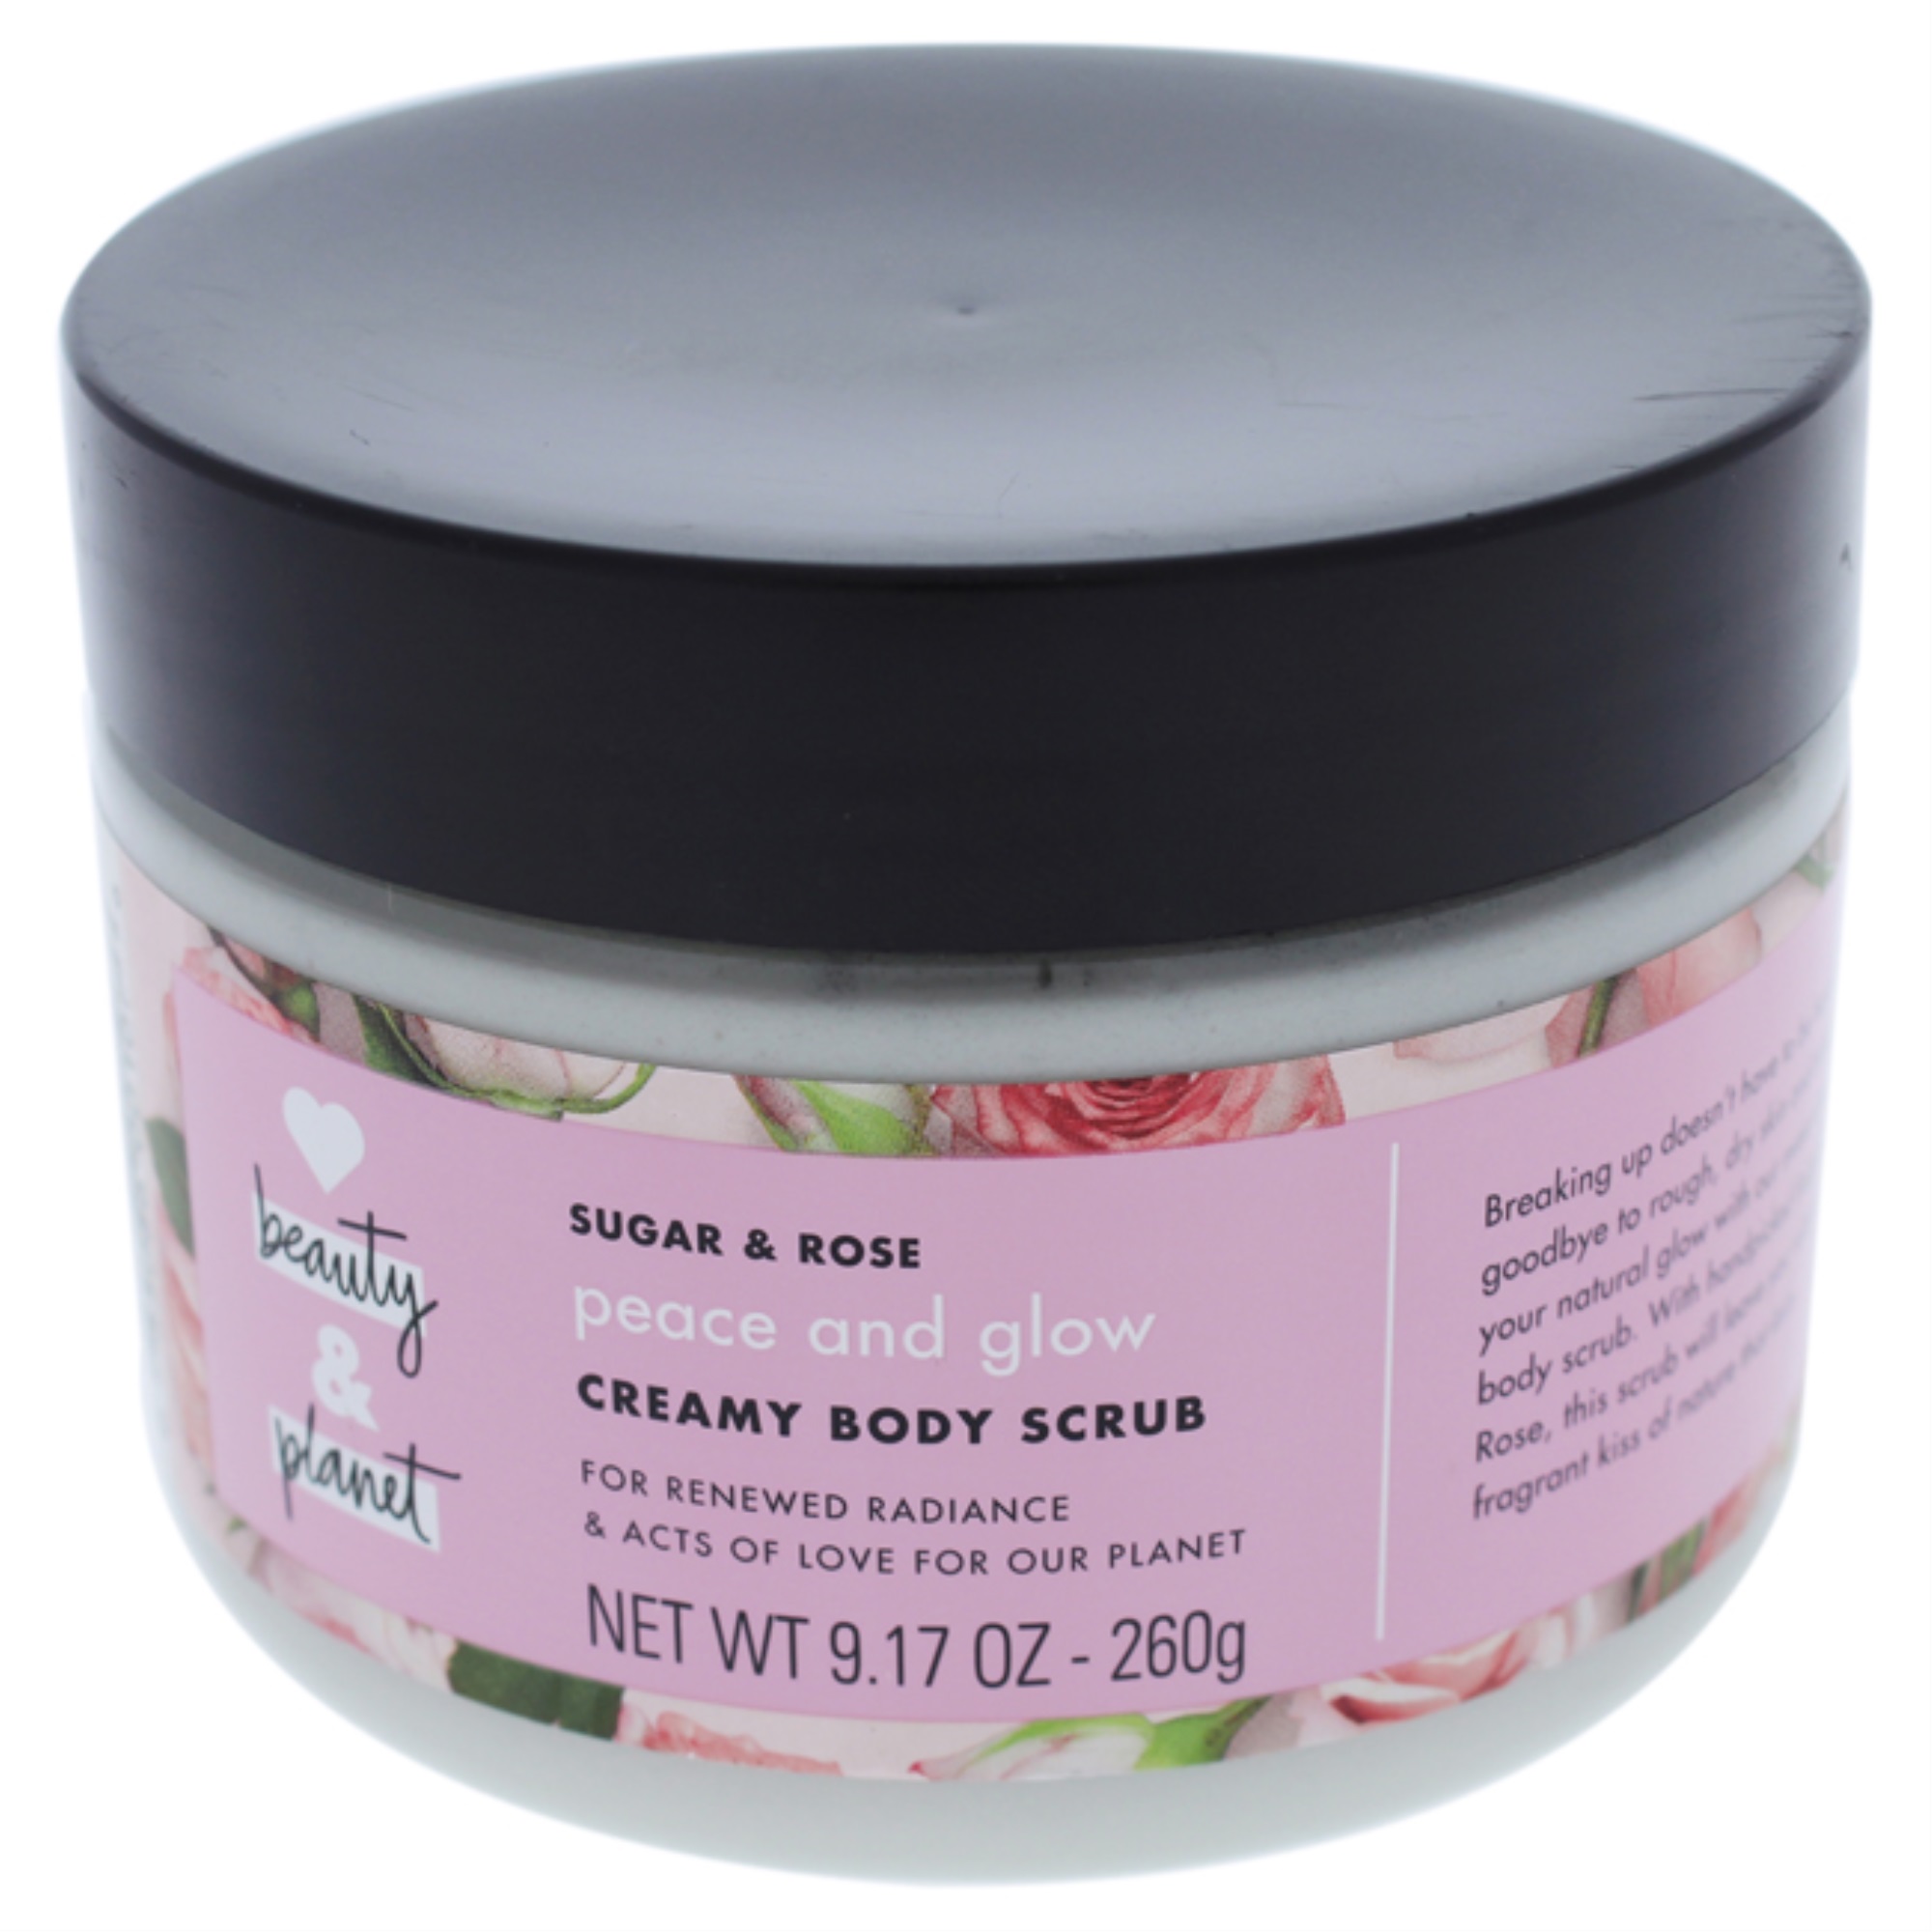 Love Beauty And Planet Sugar & Rose Scrub Creamy Exfoliating Body Scrub Peace and Glow 9.17 oz - image 1 of 13